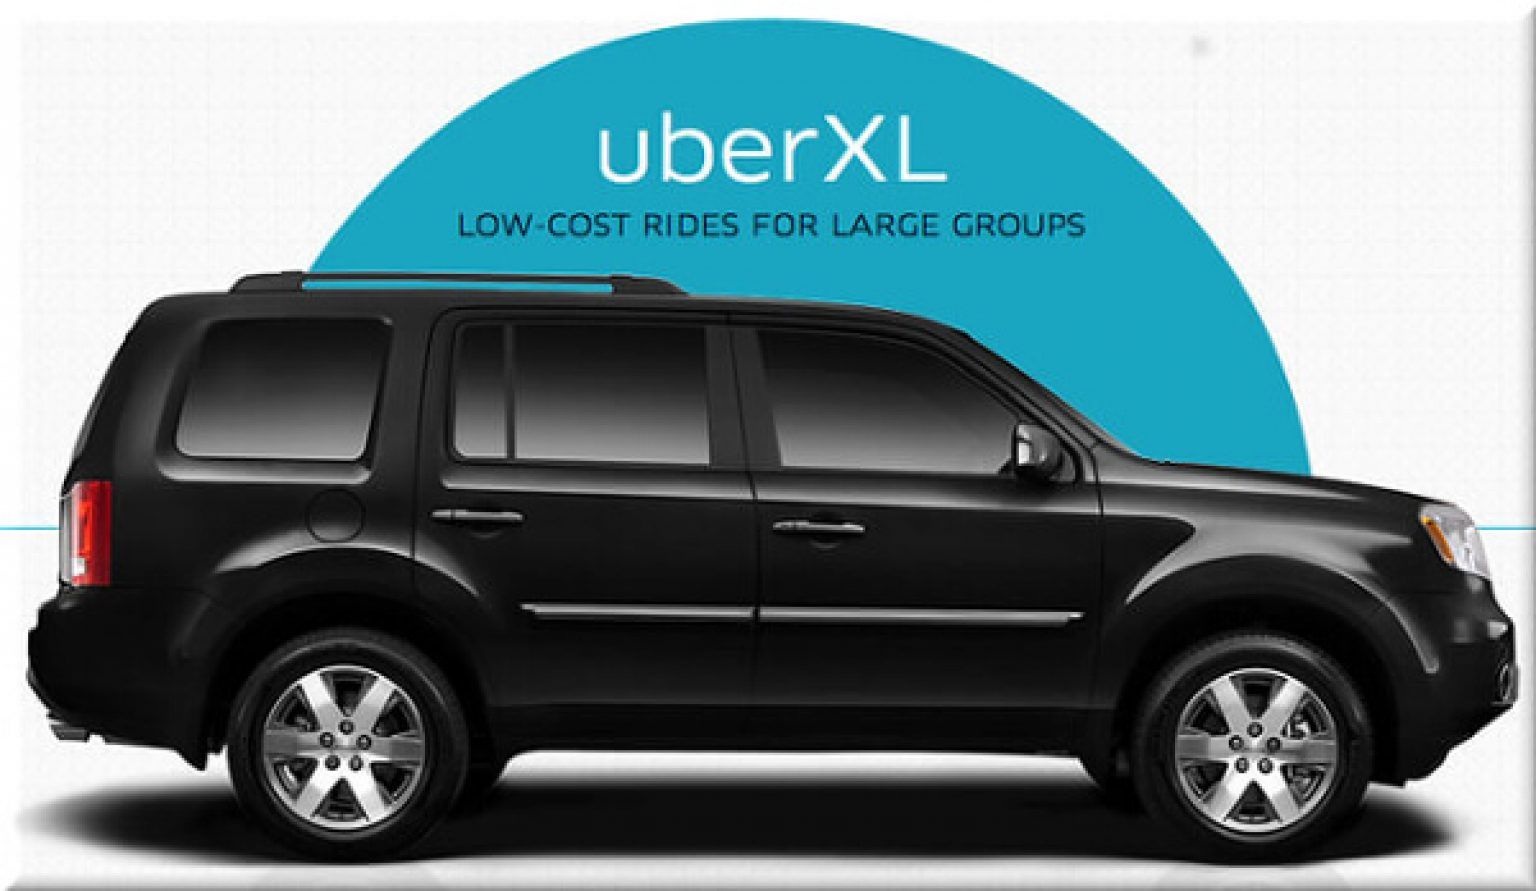 Uber Car Types Simply Explained (With Photos)